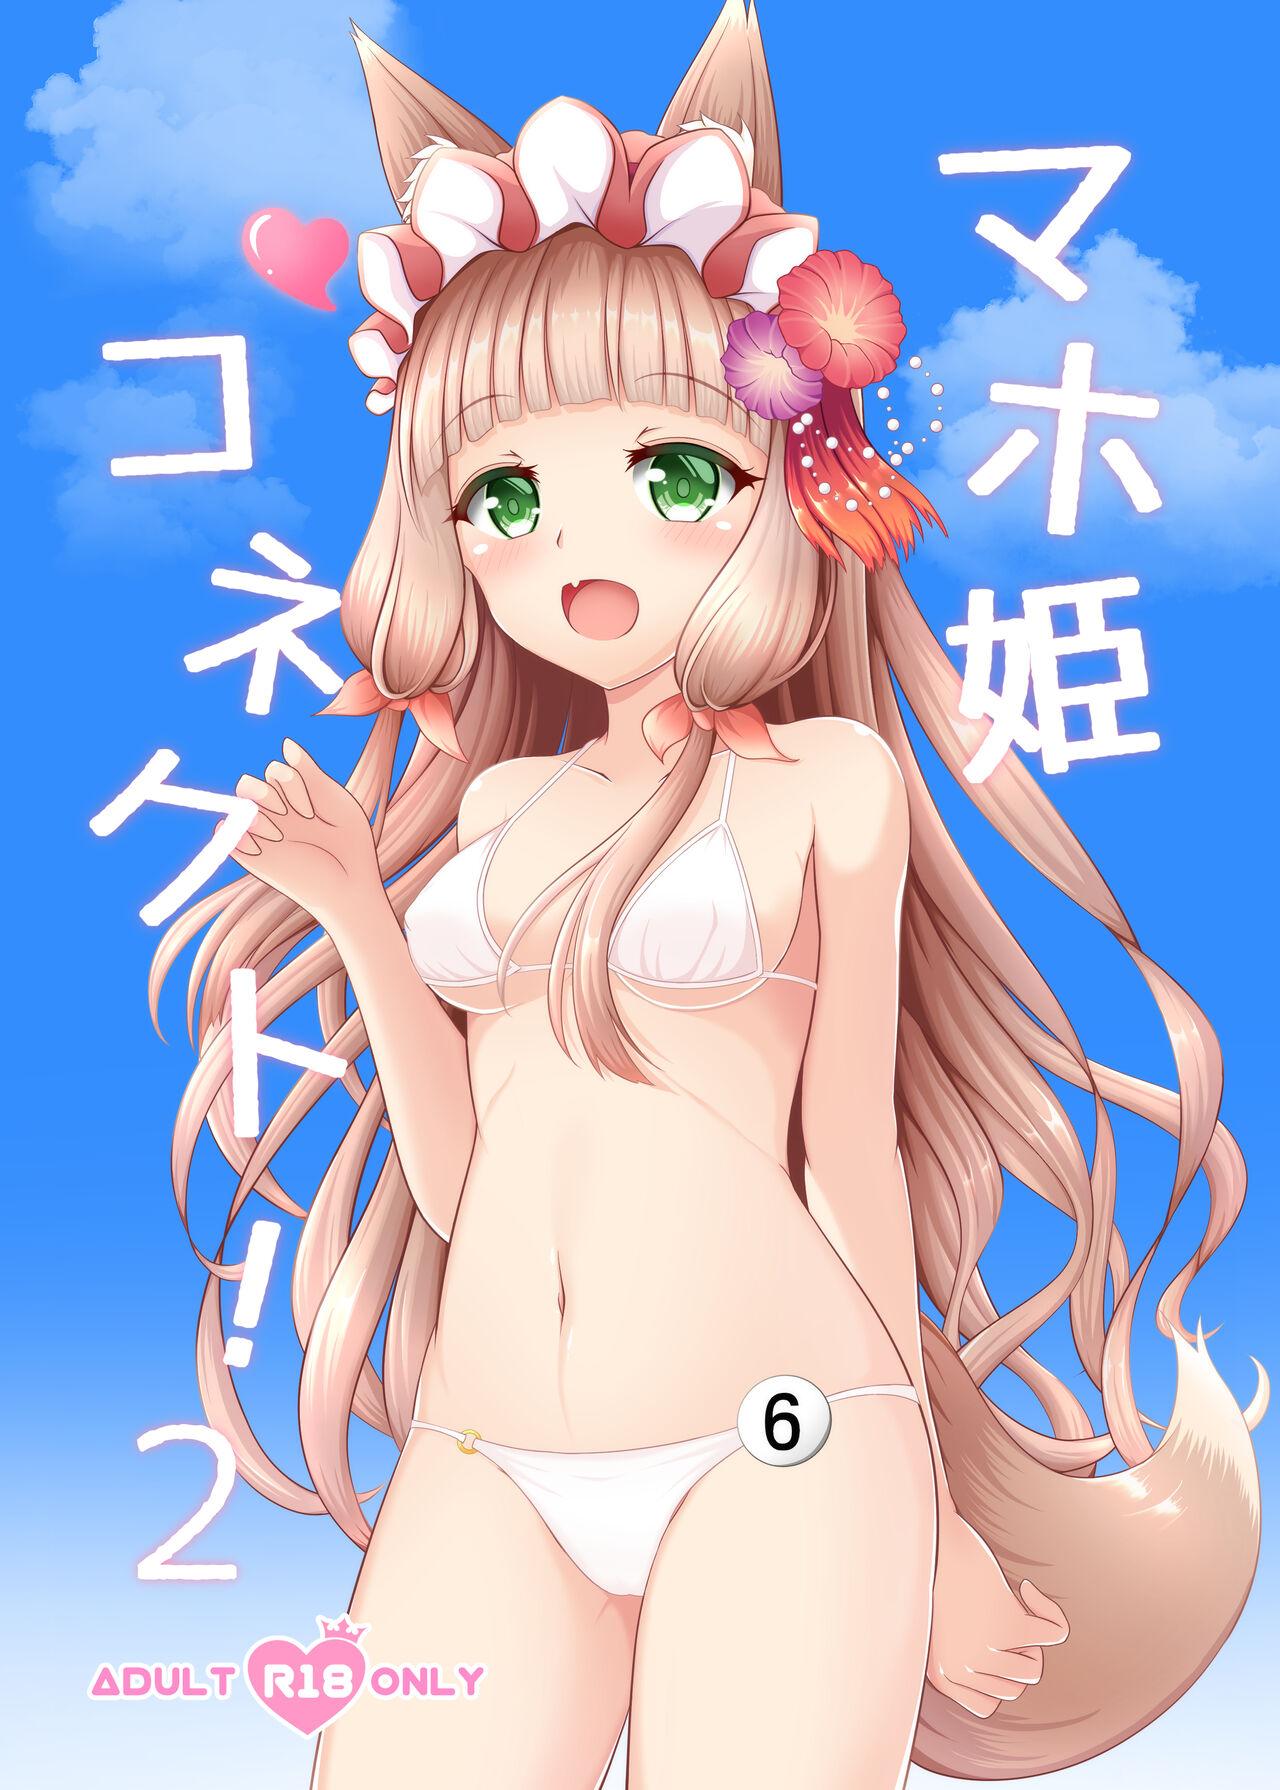 Body Maho Hime Connect! 2 - Princess connect Role Play - Picture 2